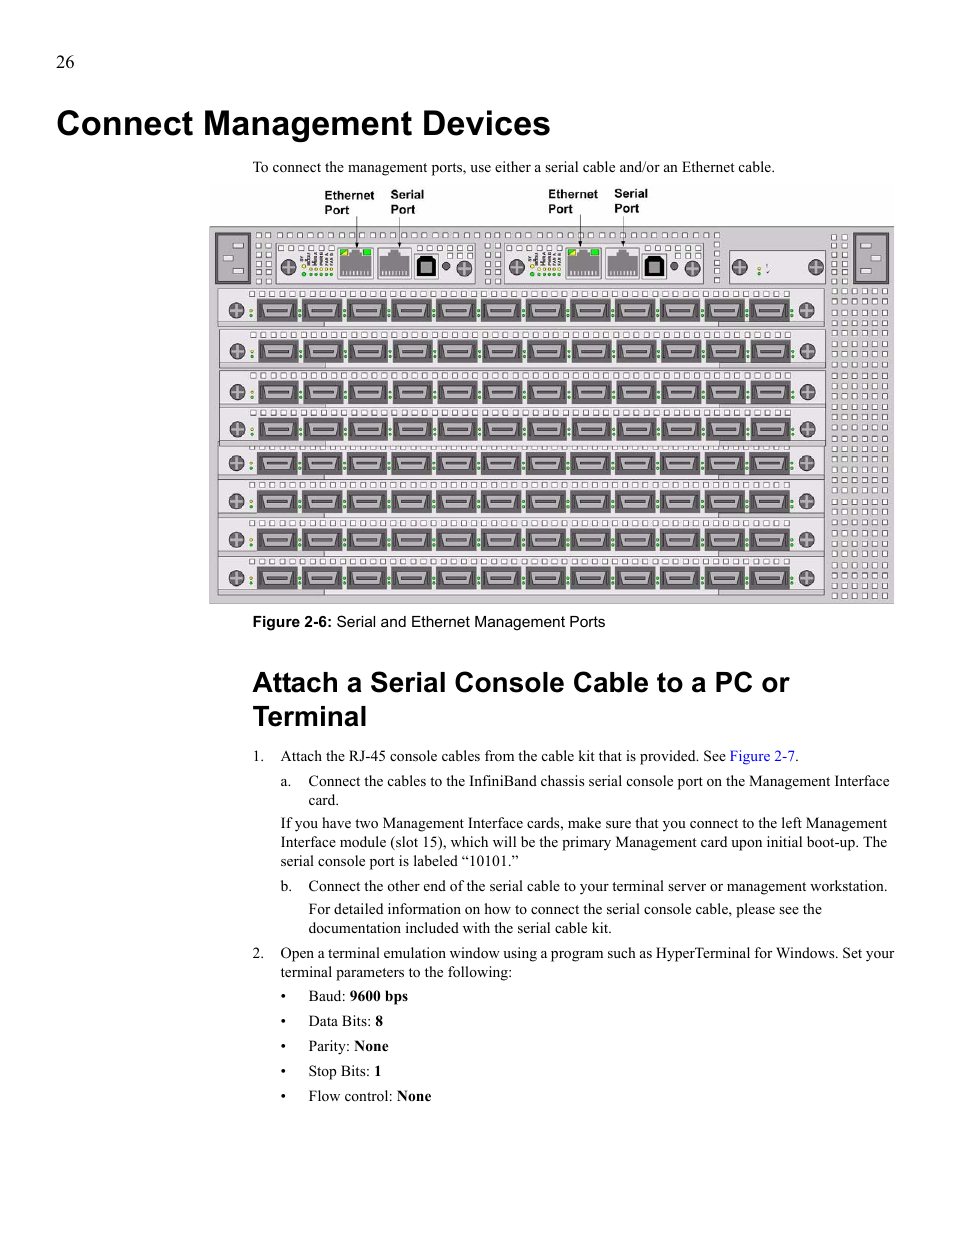 Connect management devices, Attach a serial console cable to a pc or terminal | Cisco SFS 7008 User Manual | Page 26 / 108